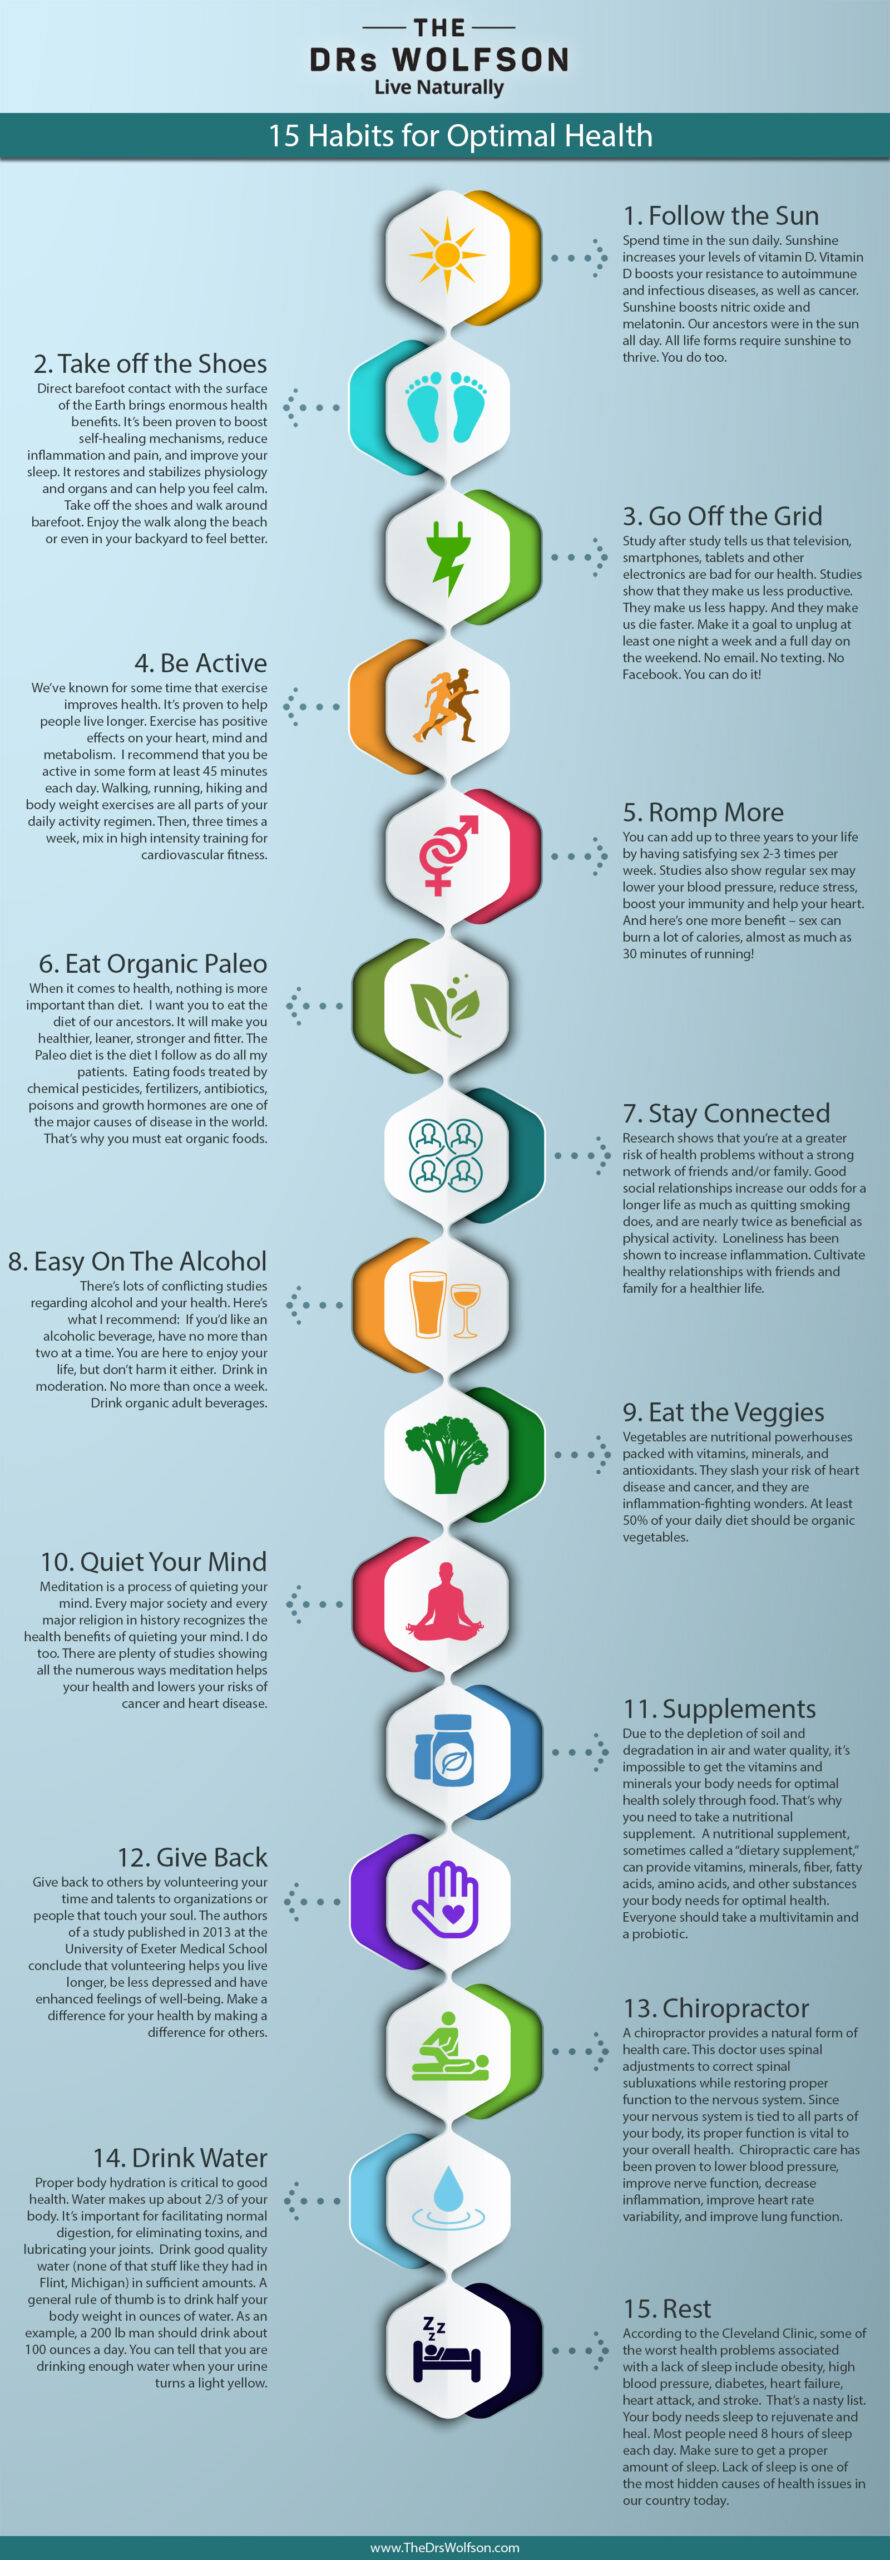 15 Habits for Optimal Health | Infographic by The Drs. Wolfson